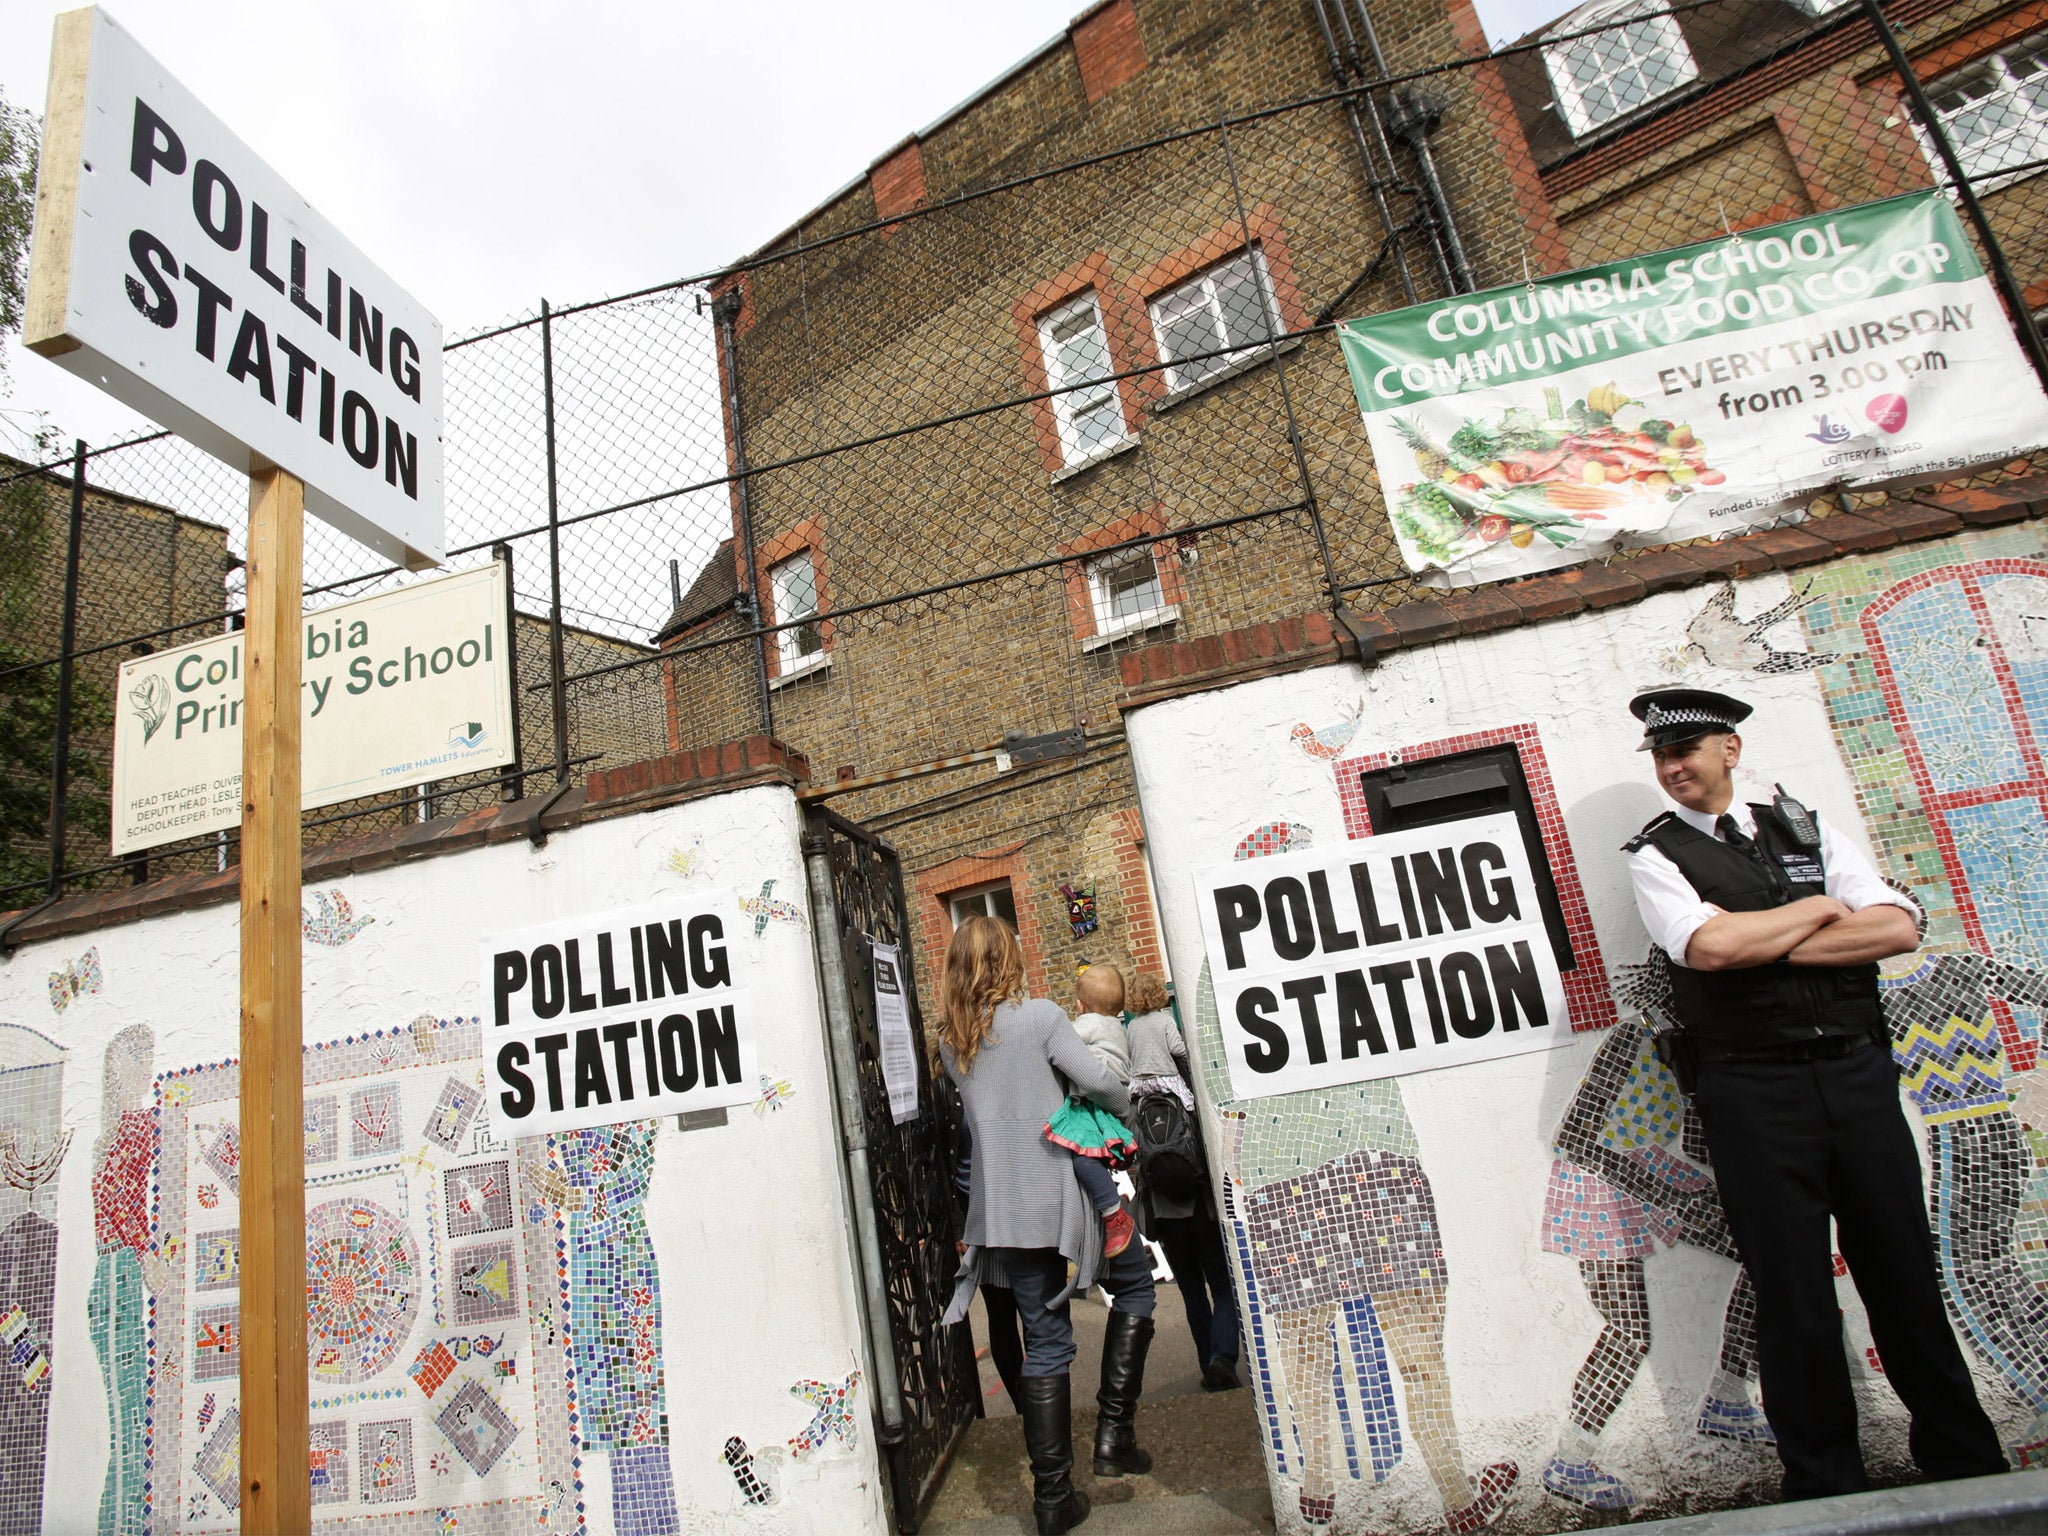 A police officer at a polling station in Tower Hamlets as part of a crackdown on voter intimidation at May’s local elections